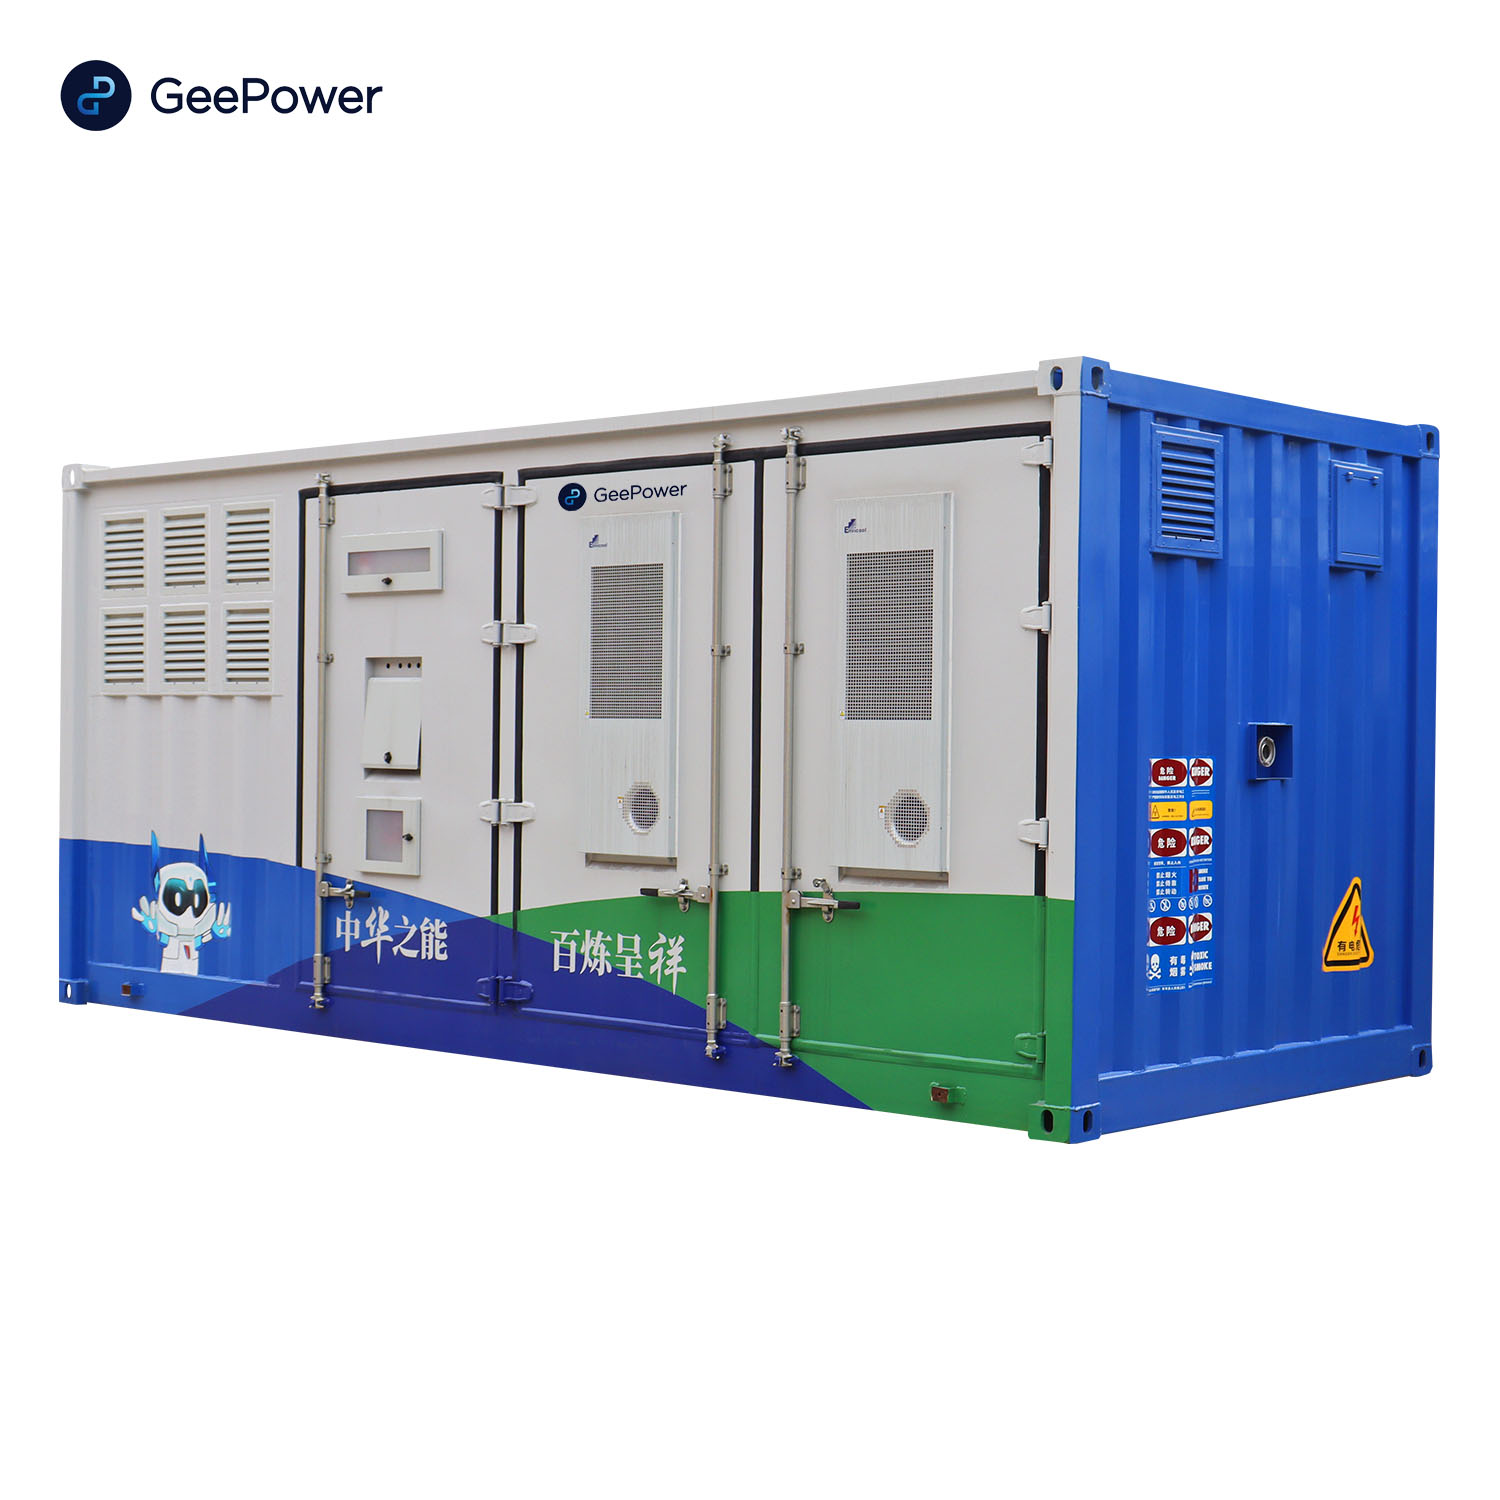 All-In-One Integrated Container Storage System CESS LiFePO4 Battery 1Mw 1075KWh BESS ESS